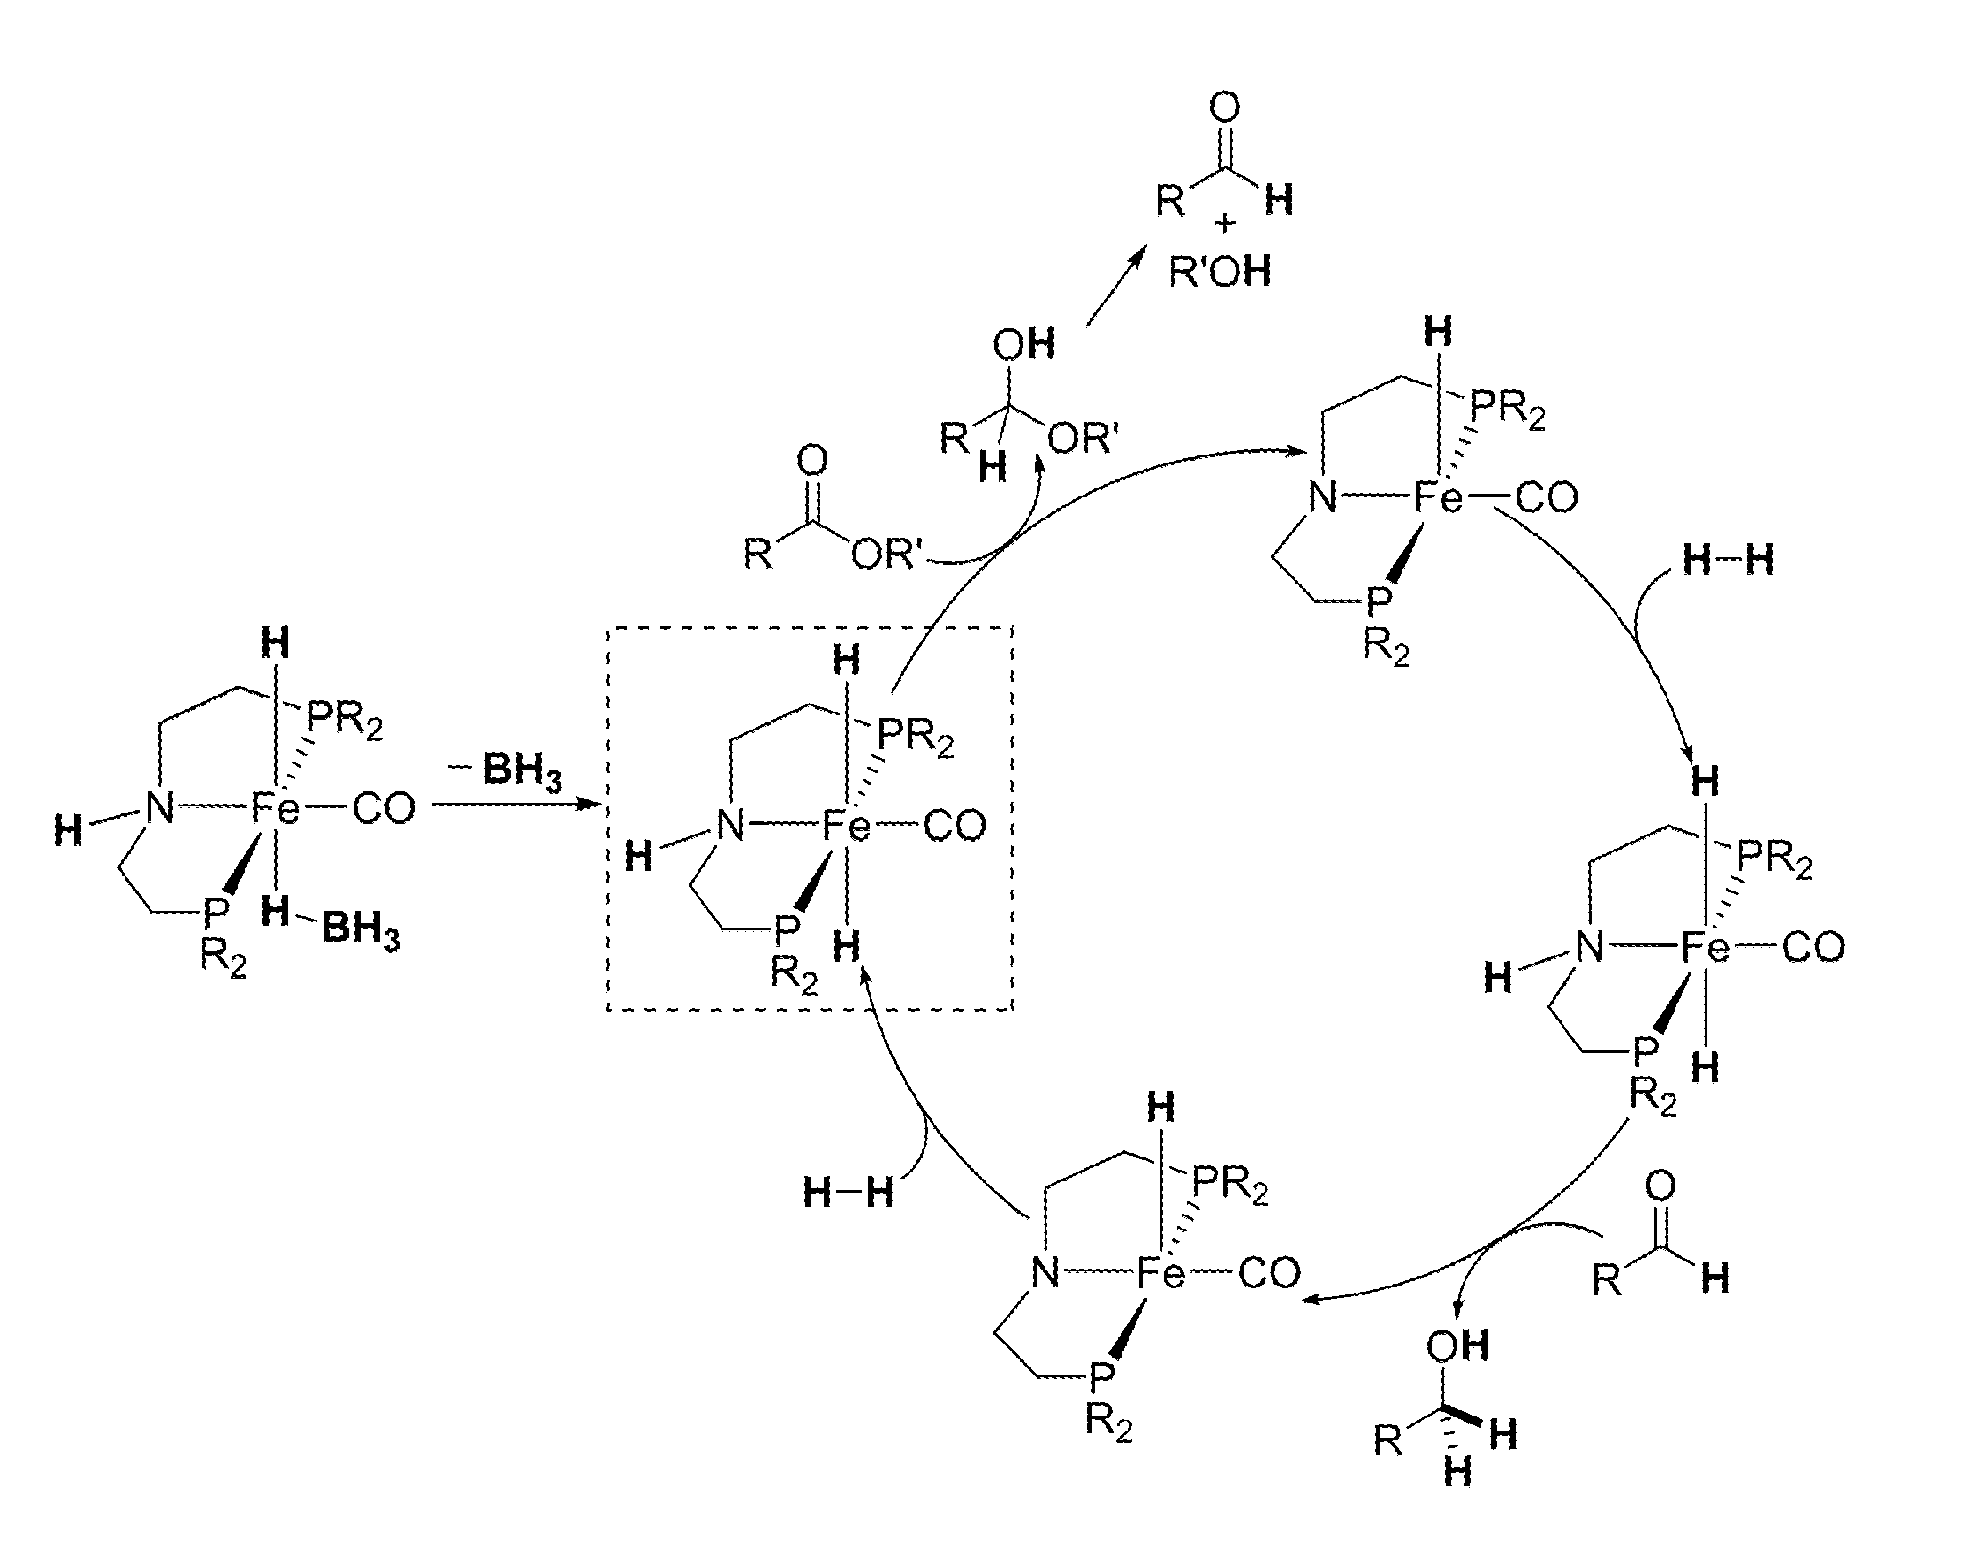 Homogeneous Hydrogenation of Esters Employing a Complex of Iron as Catalyst